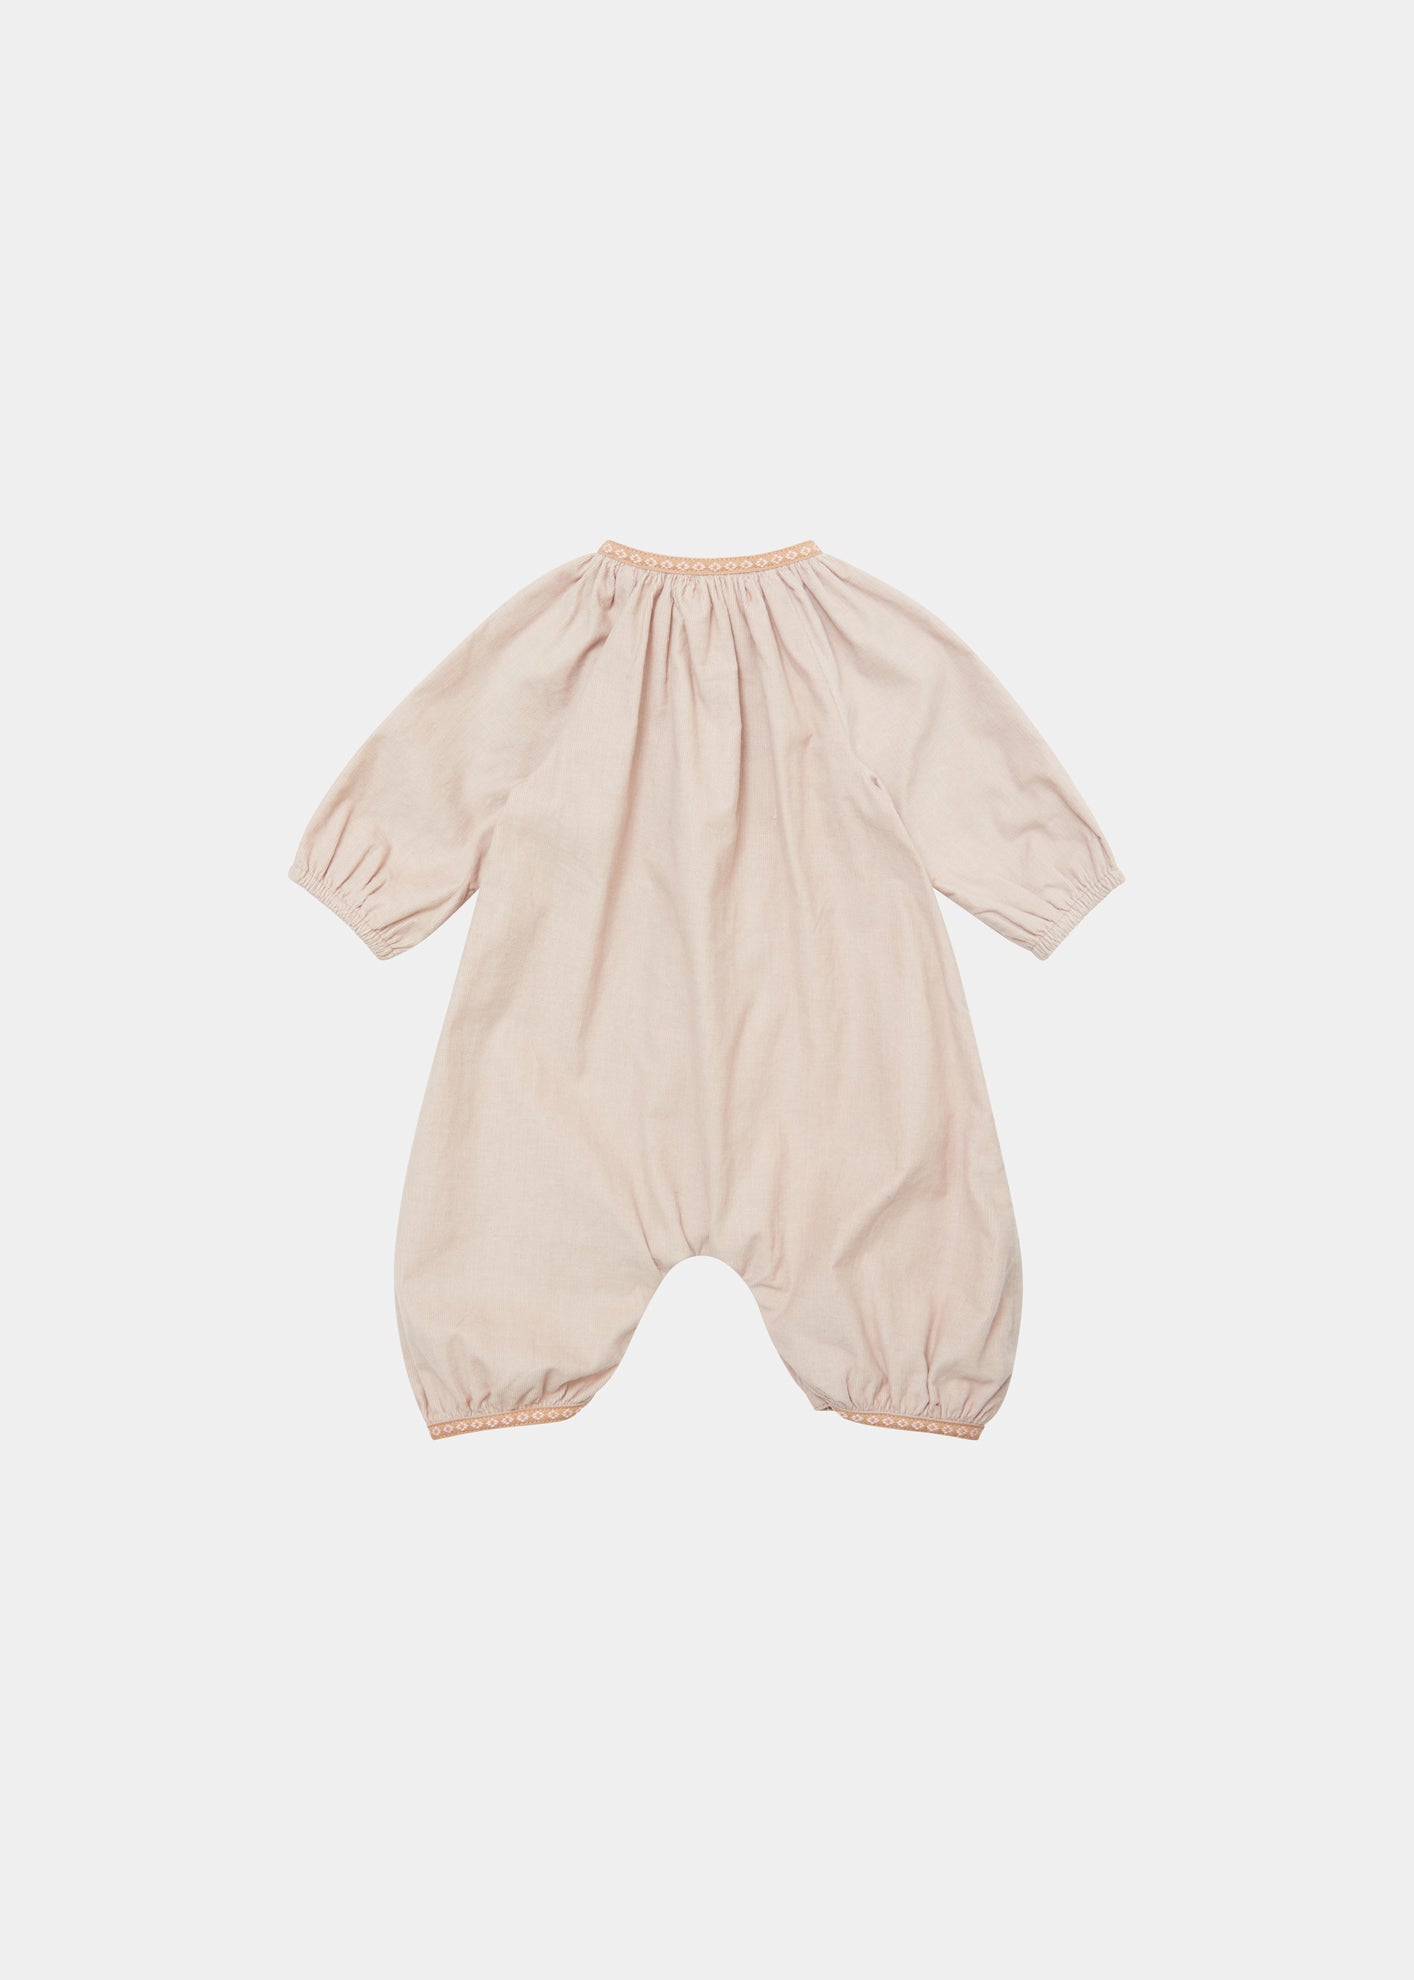 POPULUS BABY GIFTING ROMPER - SHELL PINK